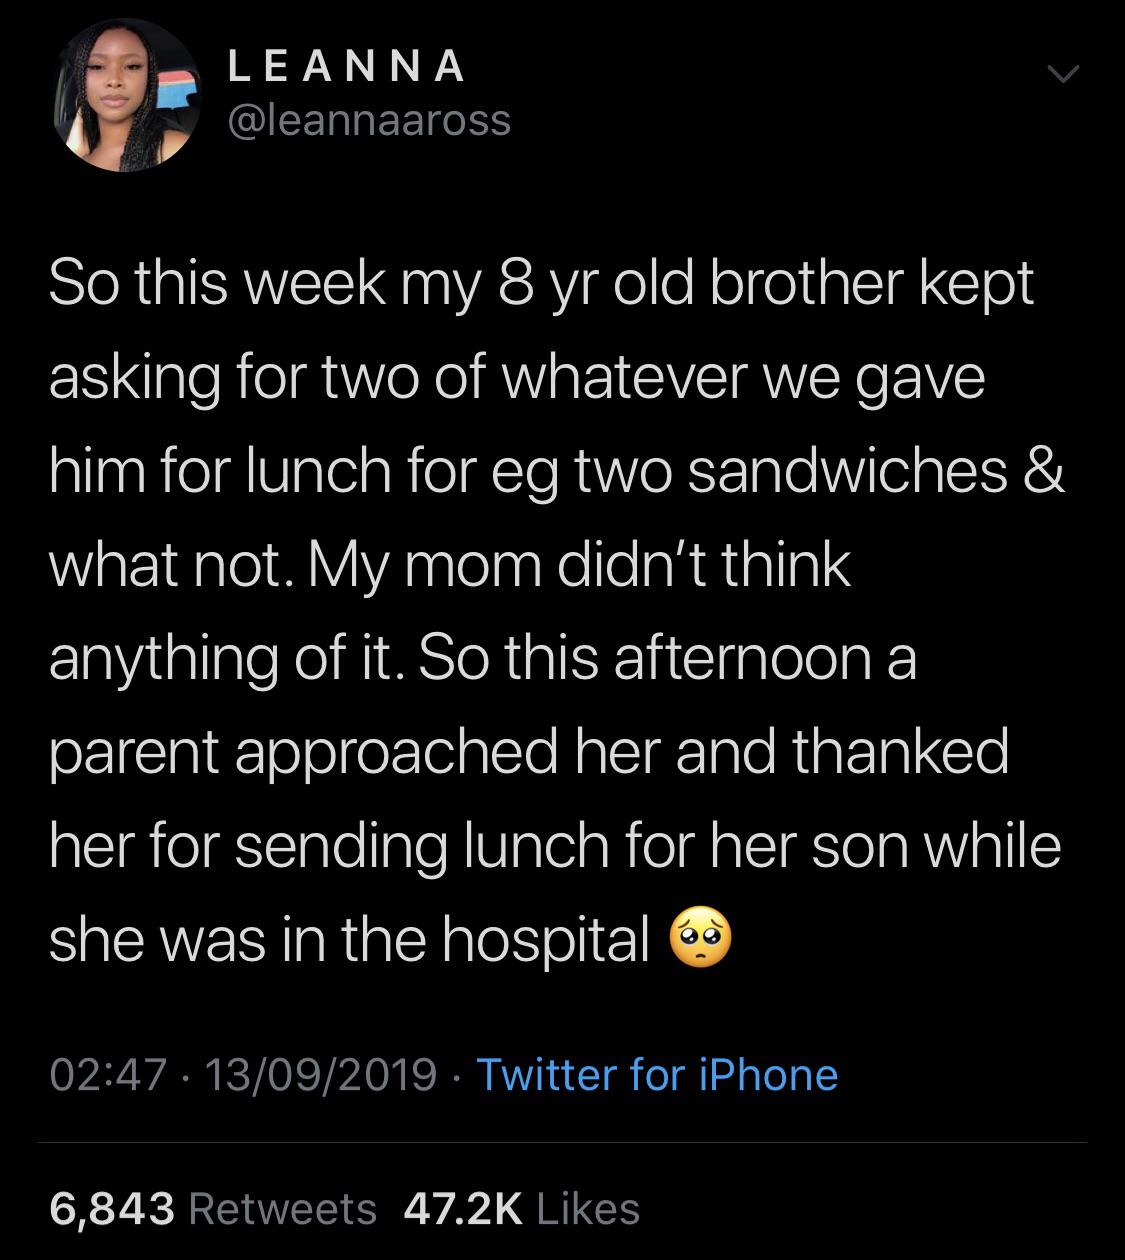 black wholesome-memes black text: LEANNA @leannaaross So this week my 8 yr old brother kept asking for two of whatever we gave him for lunch for eg two sandwiches & what not. My mom didn't think anything of it. So this afternoon a parent approached her and thanked her for sending lunch for her son while she was in the hospital 02:47 • 13/09/2019 • Twitter for iPhone 47.2K Likes 6,843 Retweets 